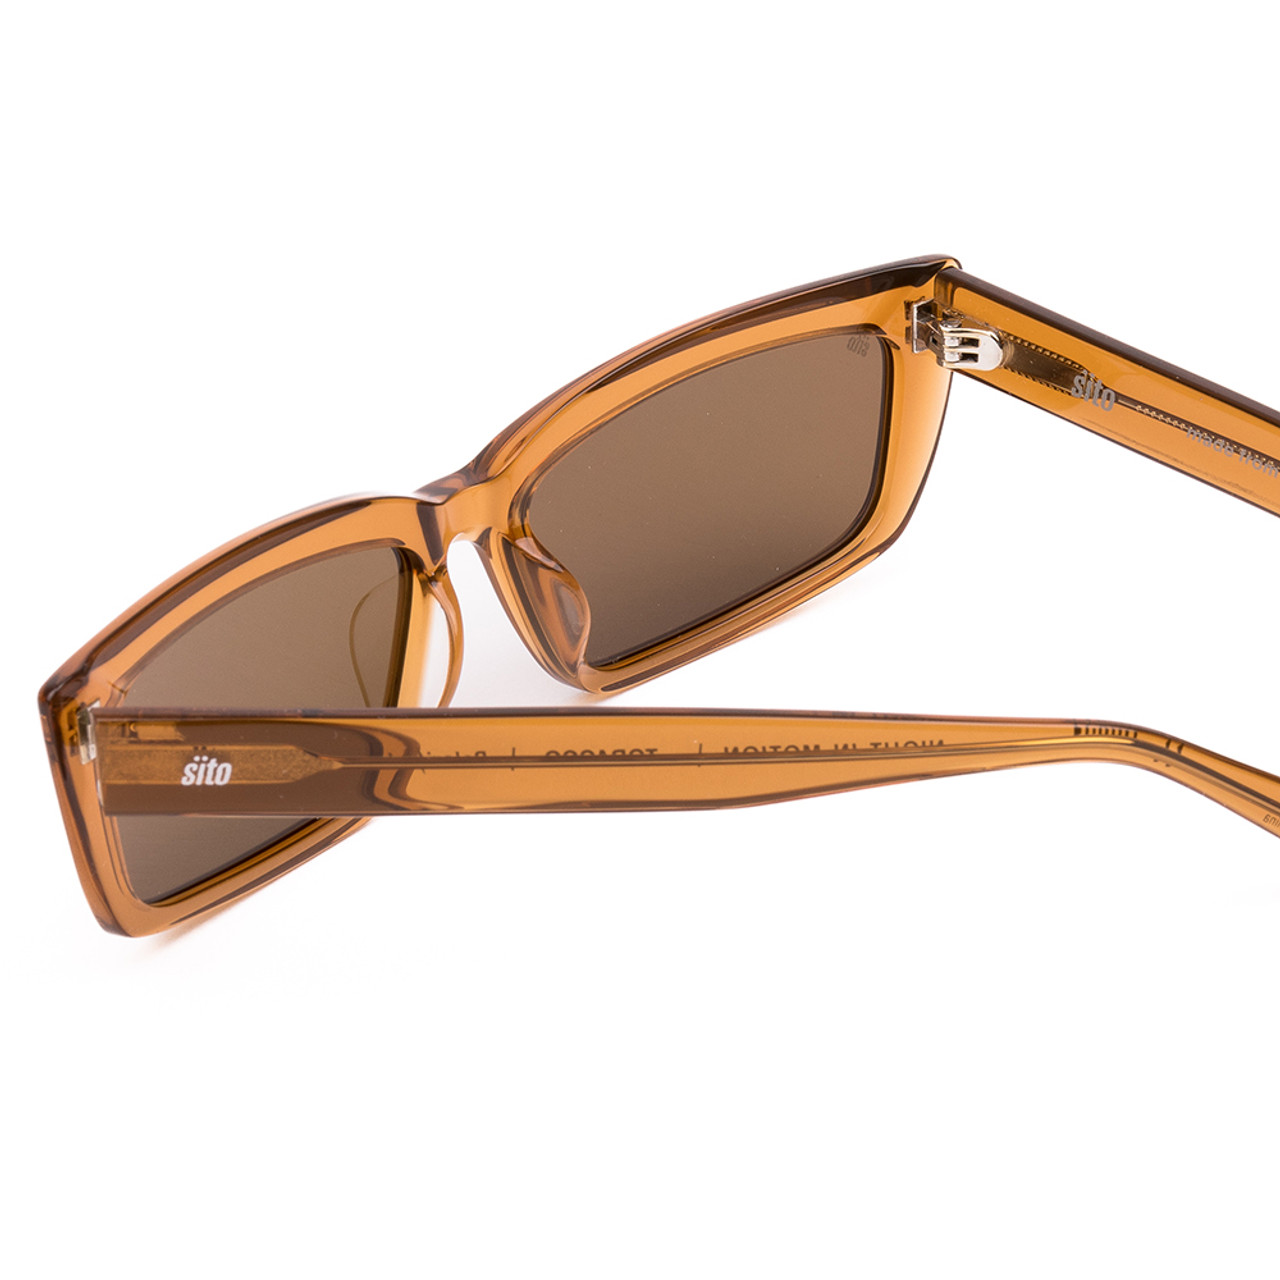 Close Up View of SITO SHADES NIGHT IN MOTION Unisex Sunglasses Tobacco Orange Crystal/Brown 57 mm